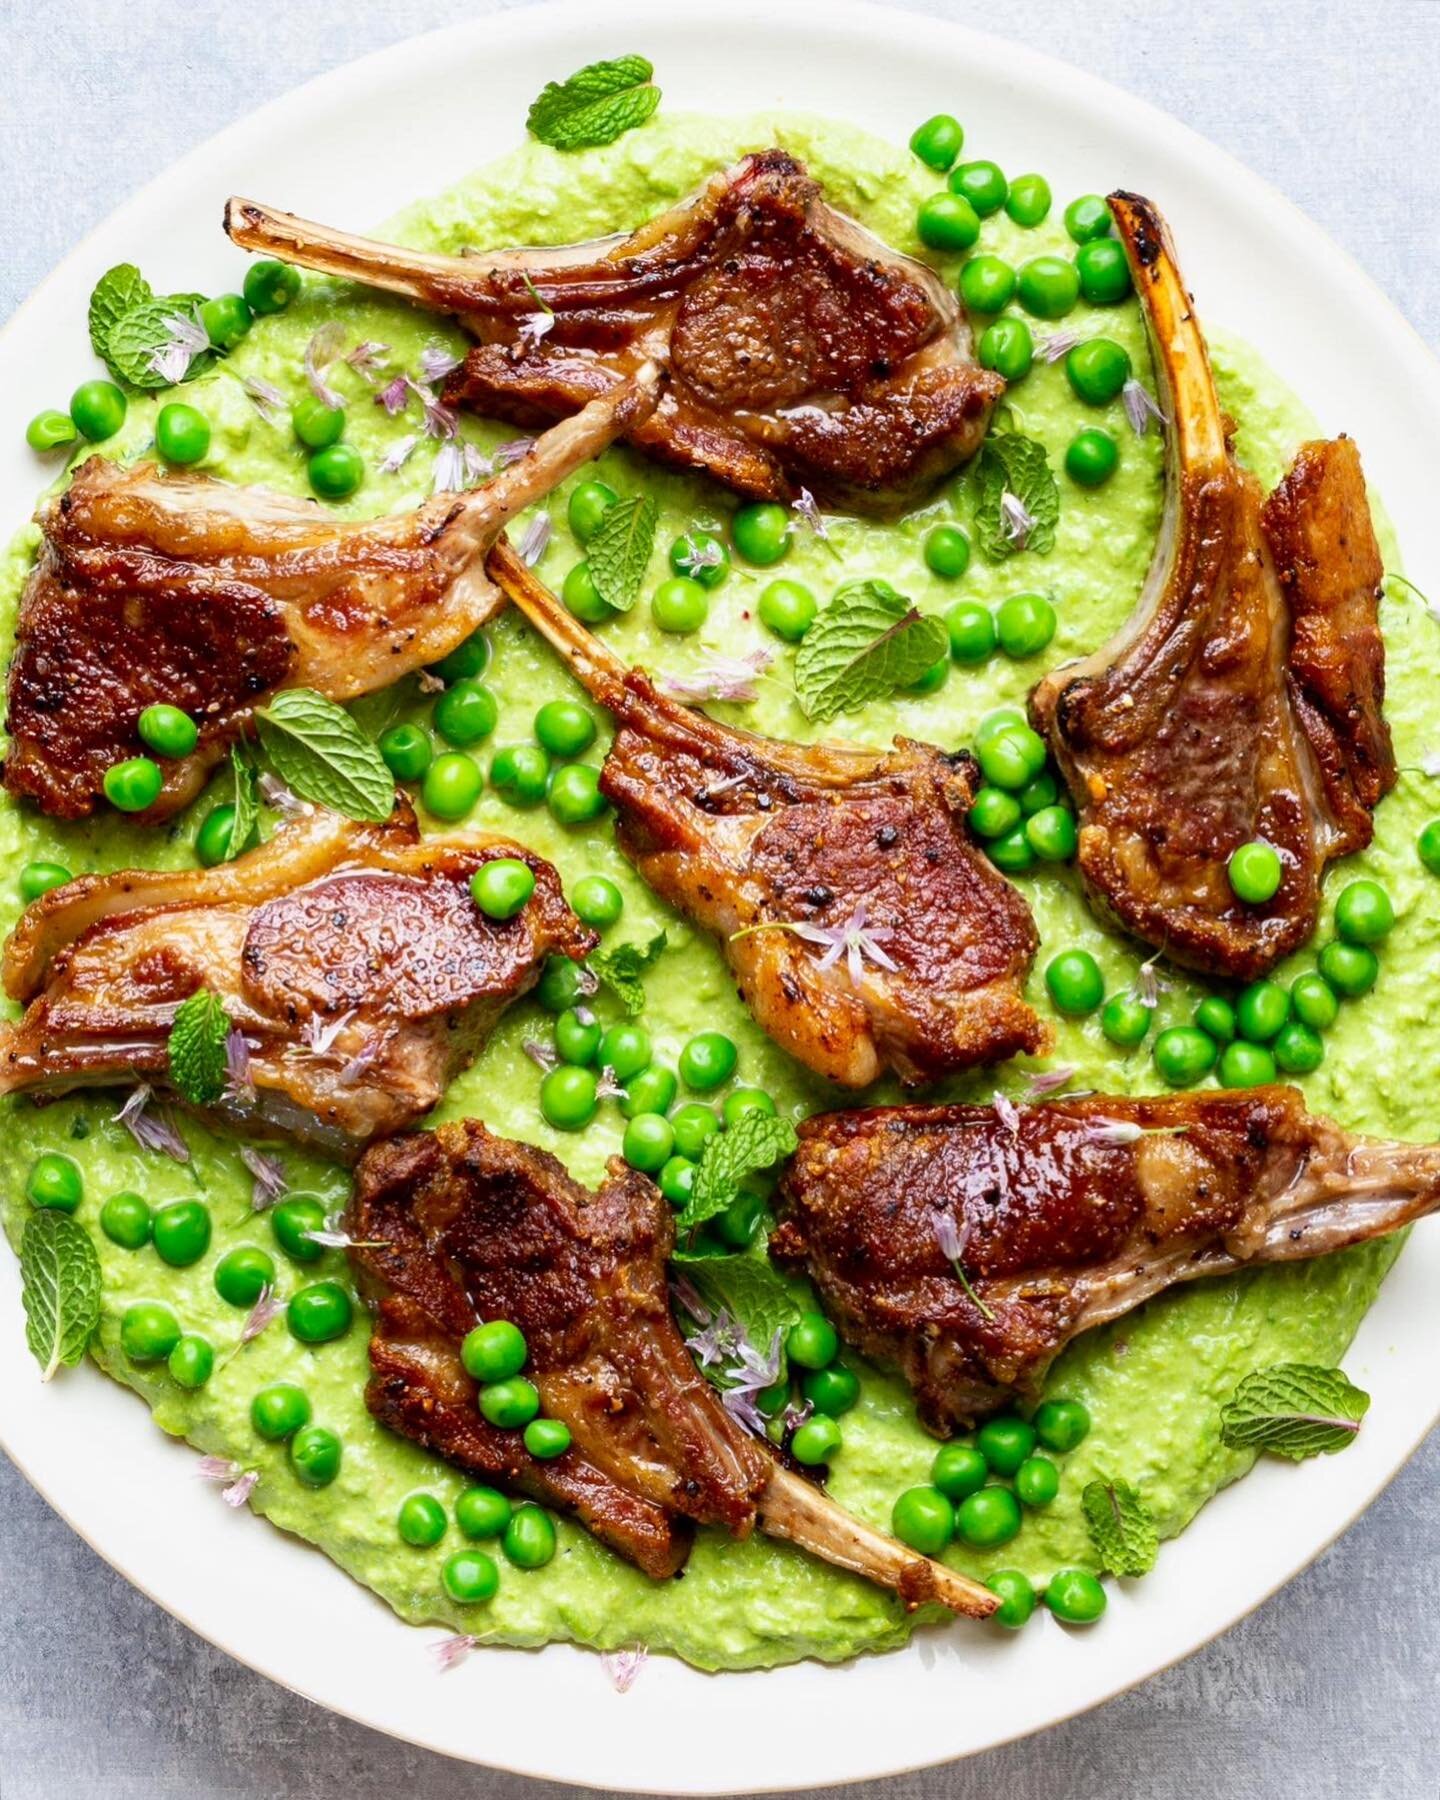 Lamb chops with a minty pea pur&eacute;e. This little recipe was a favorite last year, and since you might be planning a weekend menu still, I decided to share again 🙂 Lamb is generally easier to find this time of year so I stock up &amp; freeze for